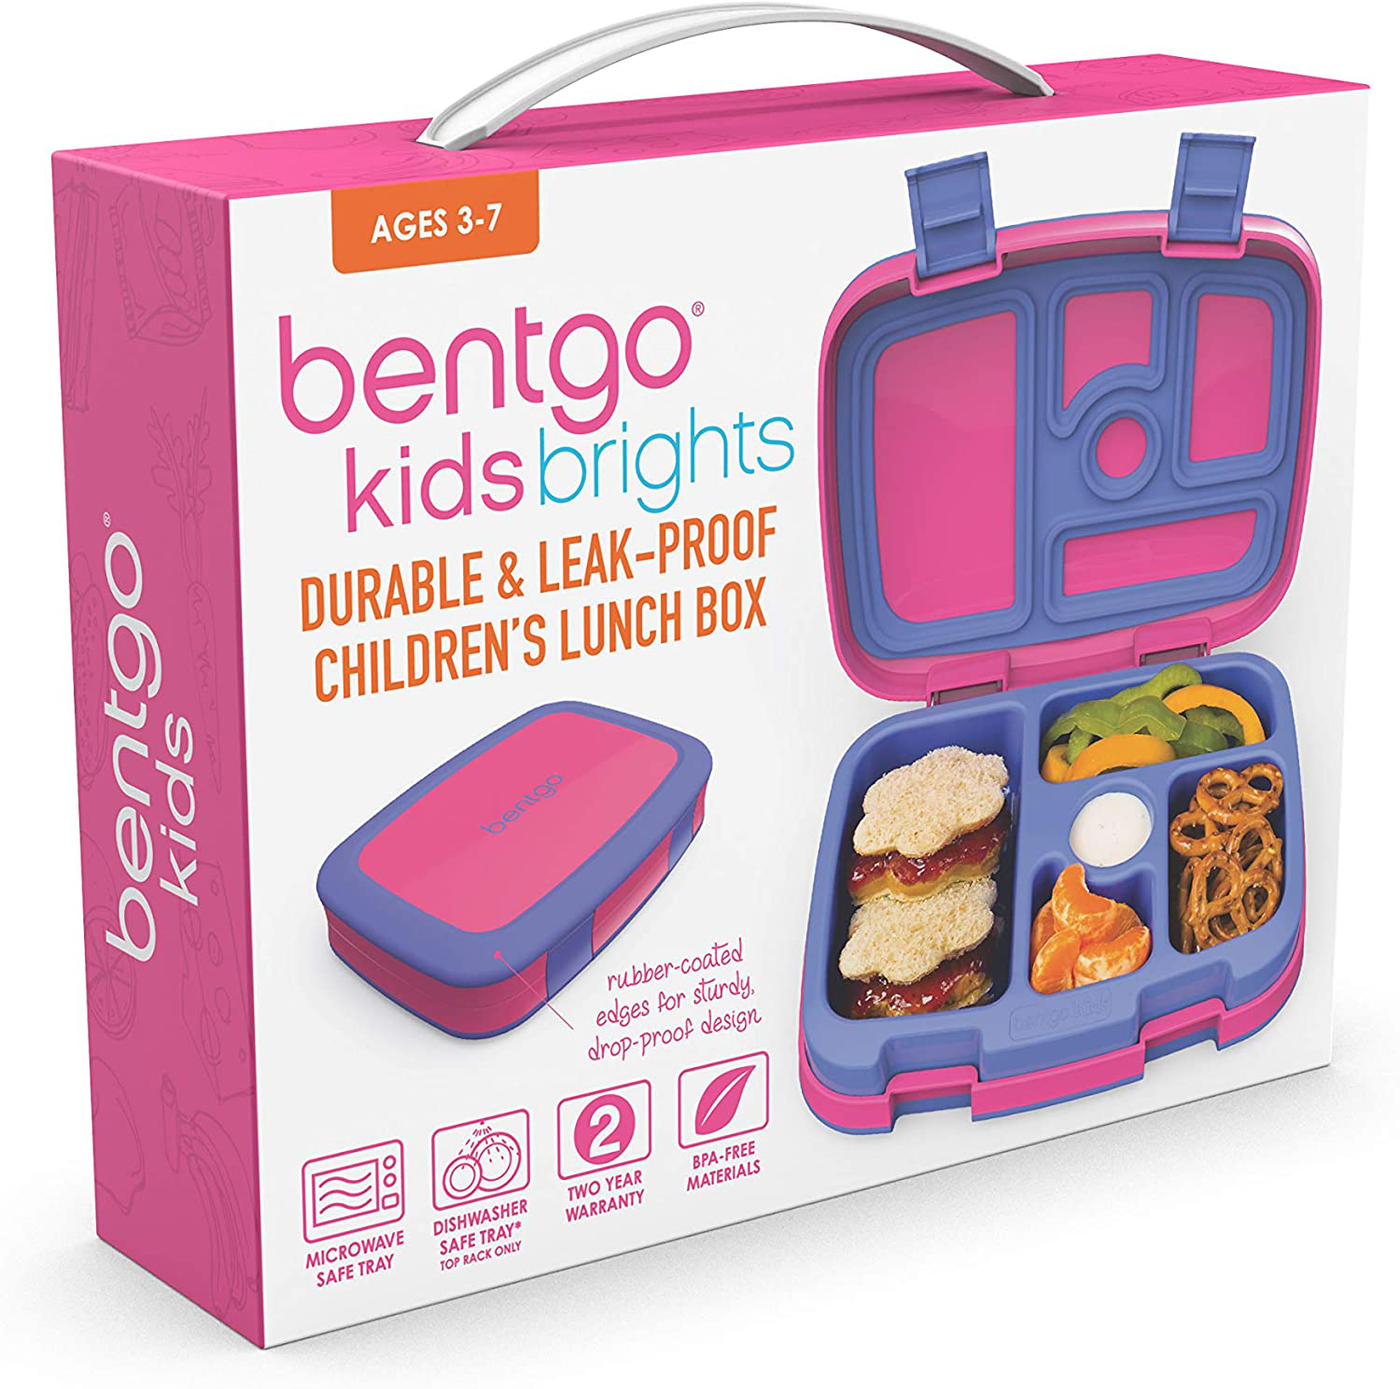 Bentgo Kids Brights – Leak-Proof, 5-Compartment Bento-Style Kids Lunch Box – Ideal Portion Sizes for Ages 3 to 7 – BPA-Free, Dishwasher Safe, Food-Safe Materials (Citrus Yellow)